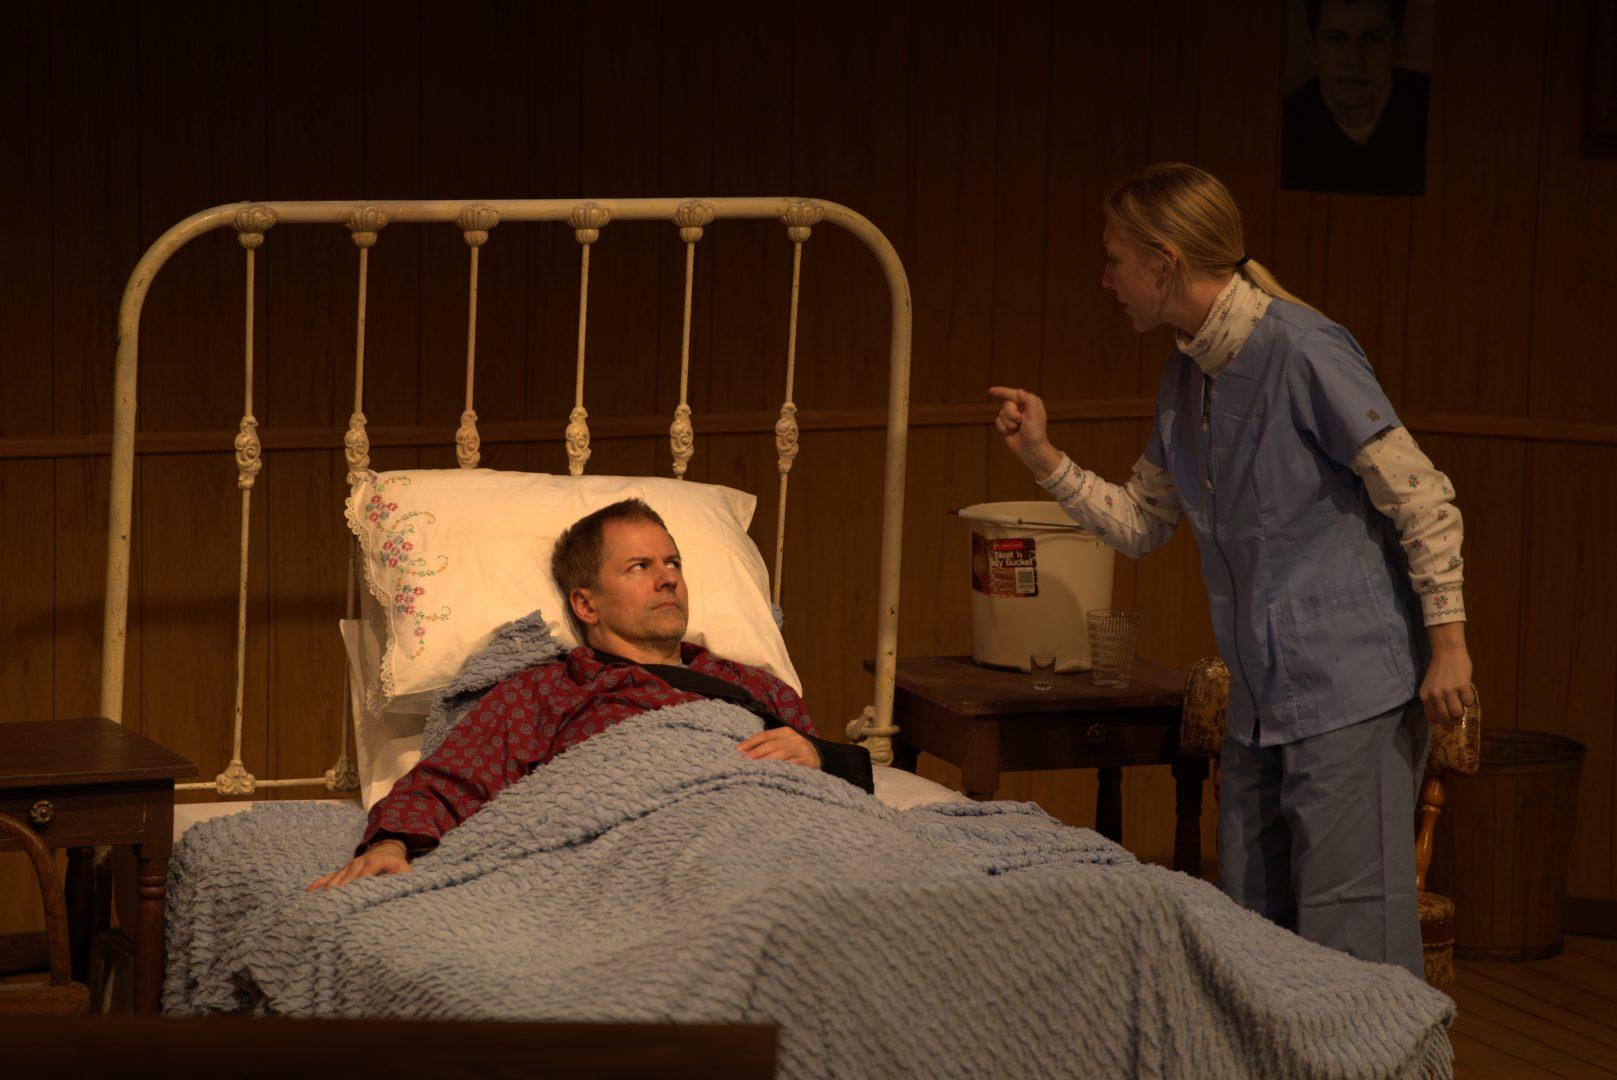 Stephen Cloud (left) plays Paul Sheldon, an author who finds himself at the mercy of his No. 1 fan, Annie Wilkes, played by Bethany Rand (right). (Blake Wolf/The Collegian)